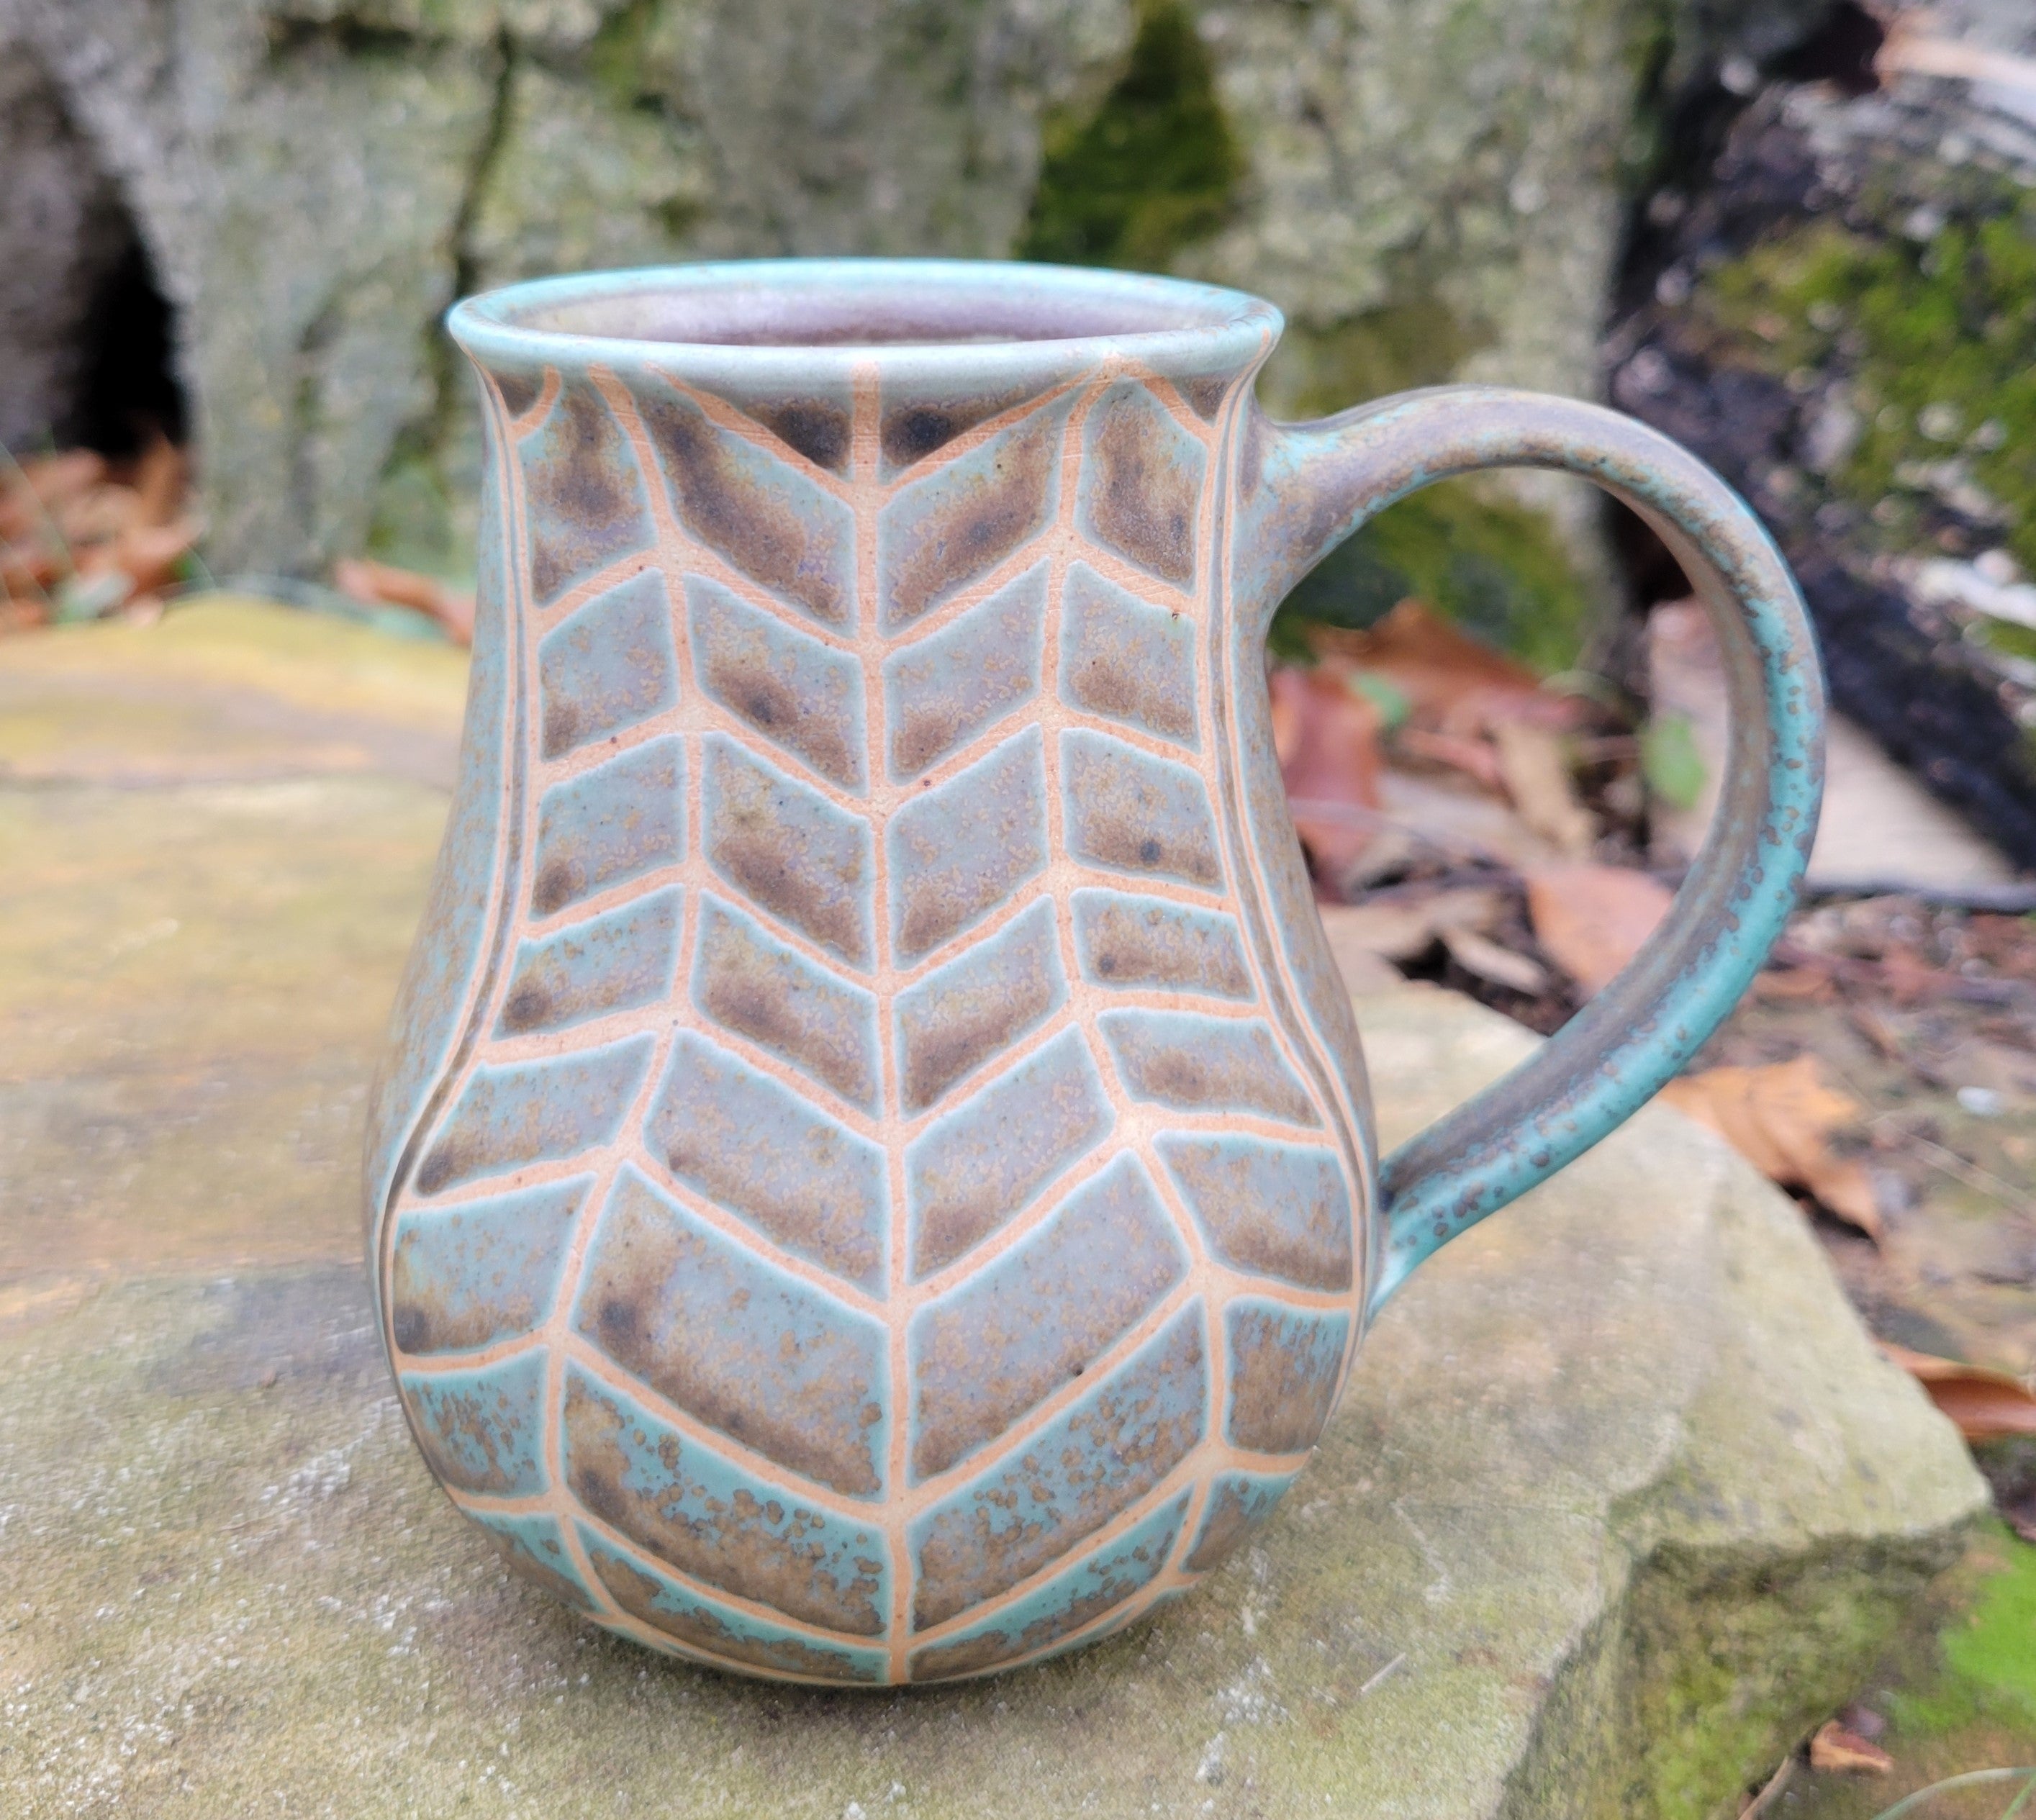 Coffee Mug in Turquoise and Lavender Chevron Pattern